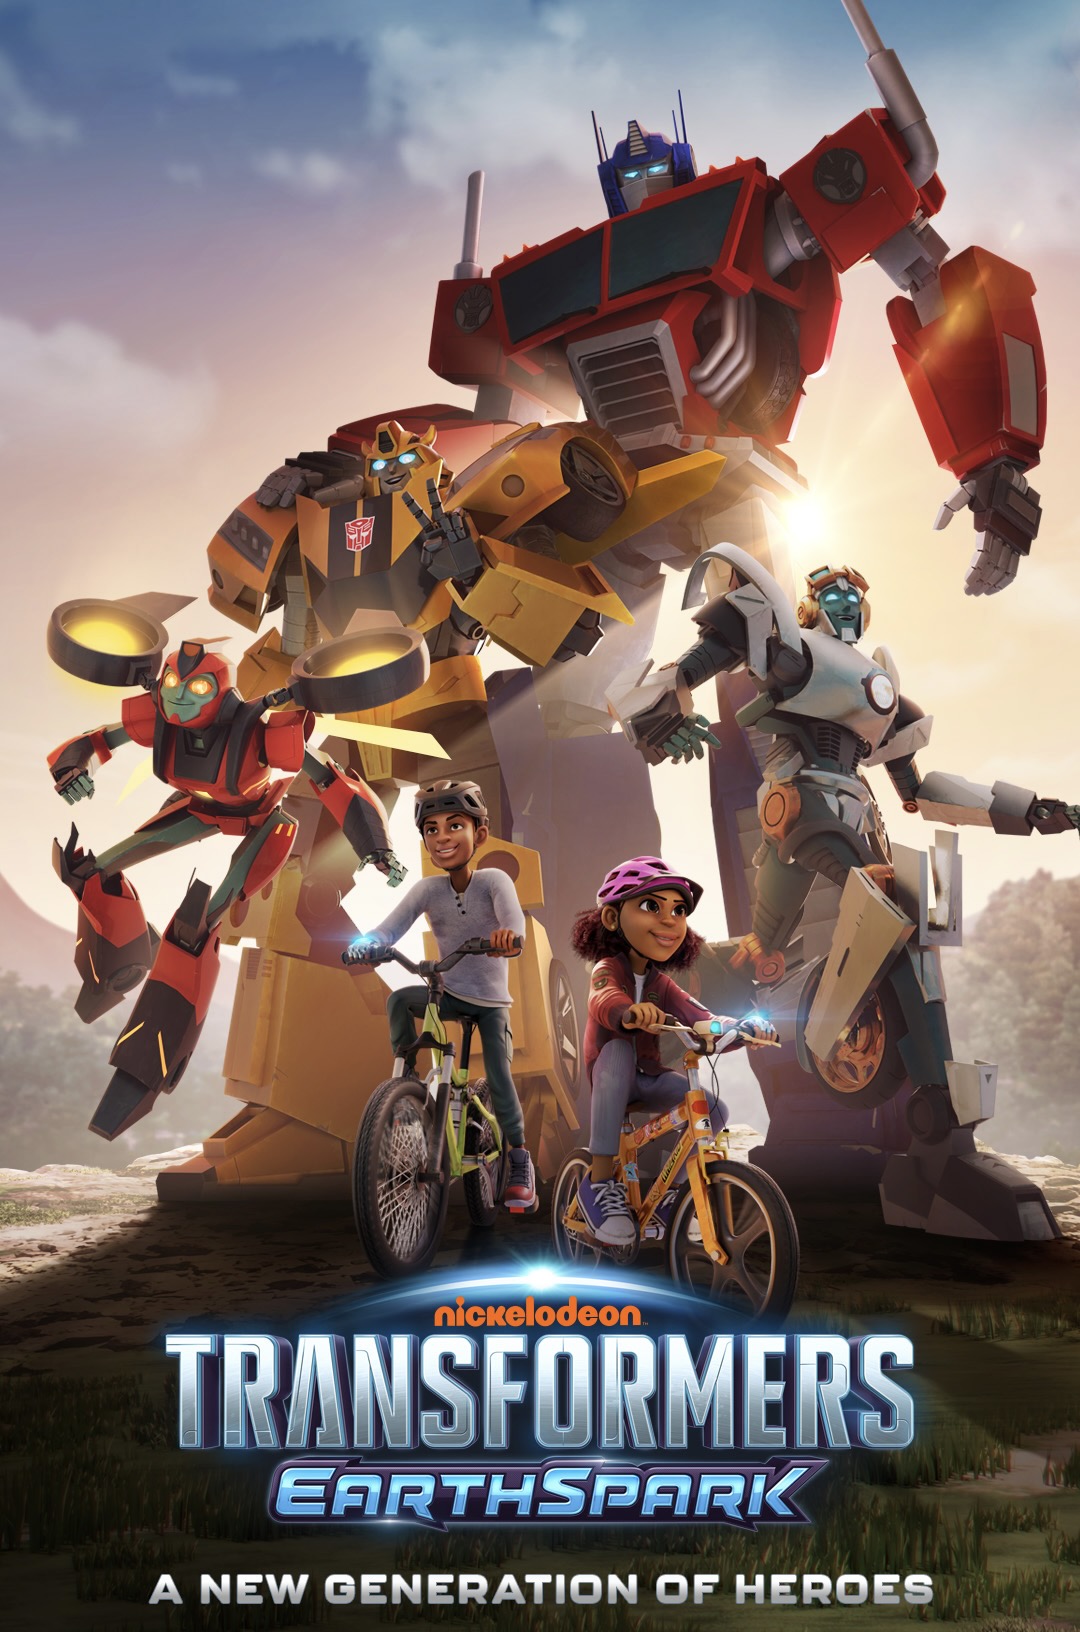 Nickelodeon announces brand-new animated series 'Transformers: Earthspark'  to premiere exclusively on OSN - Digital Studio Middle East